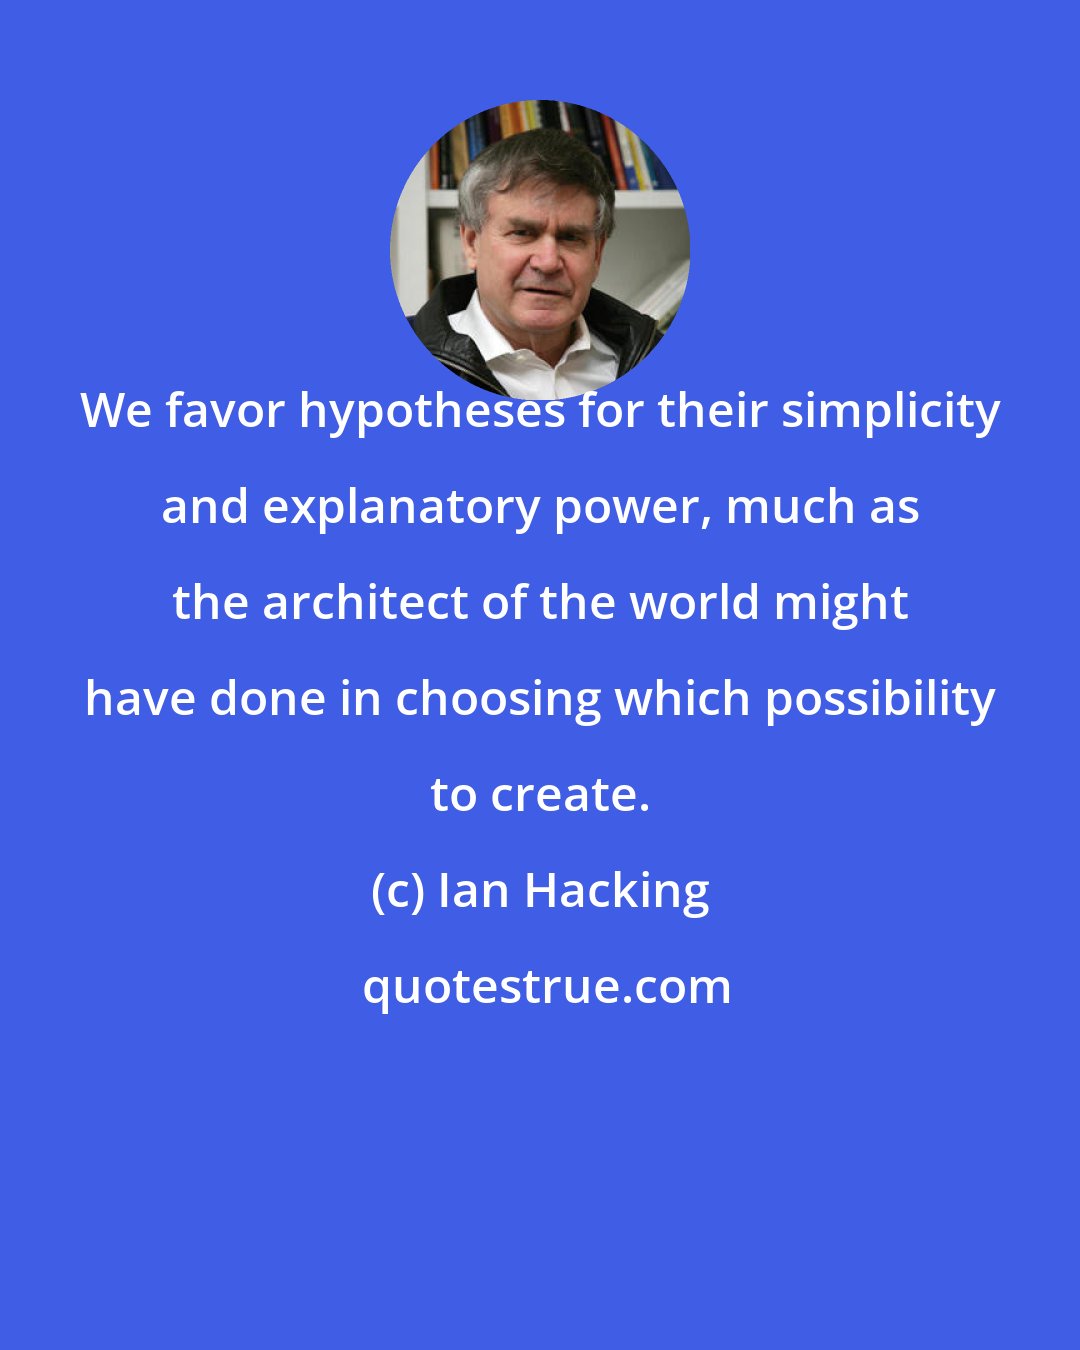 Ian Hacking: We favor hypotheses for their simplicity and explanatory power, much as the architect of the world might have done in choosing which possibility to create.